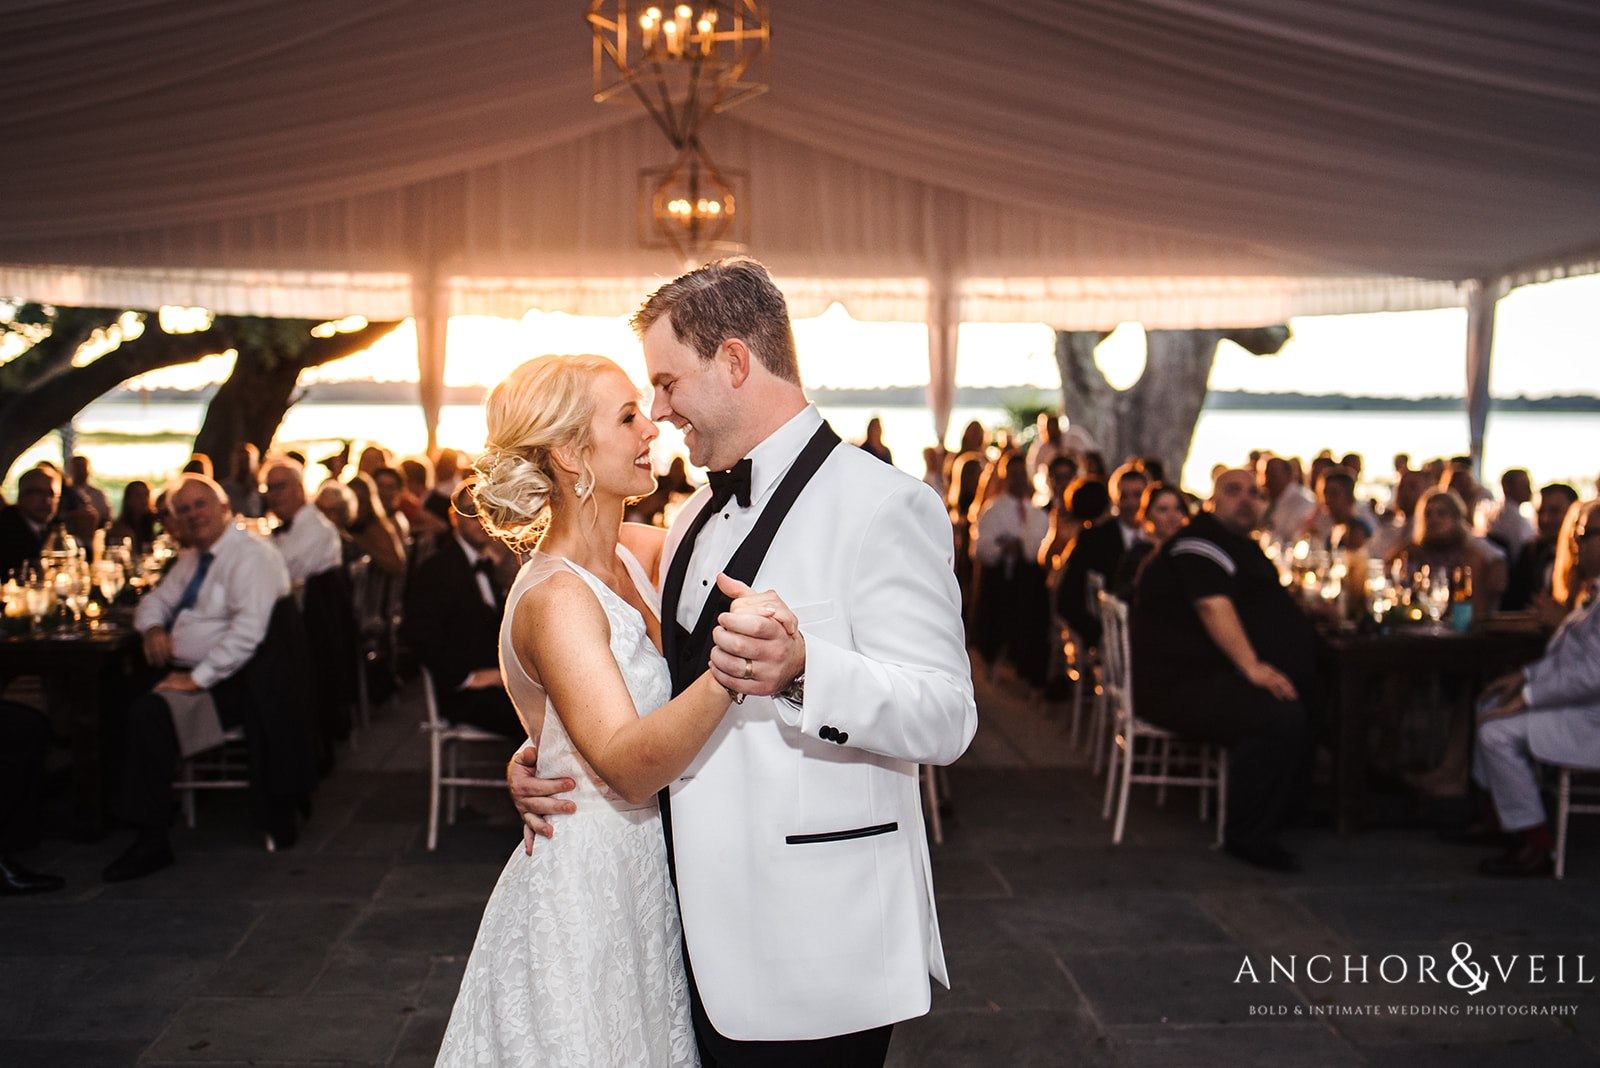 Dancing at sunset for the bride and groom at the Lowndes Grove Plantation Wedding